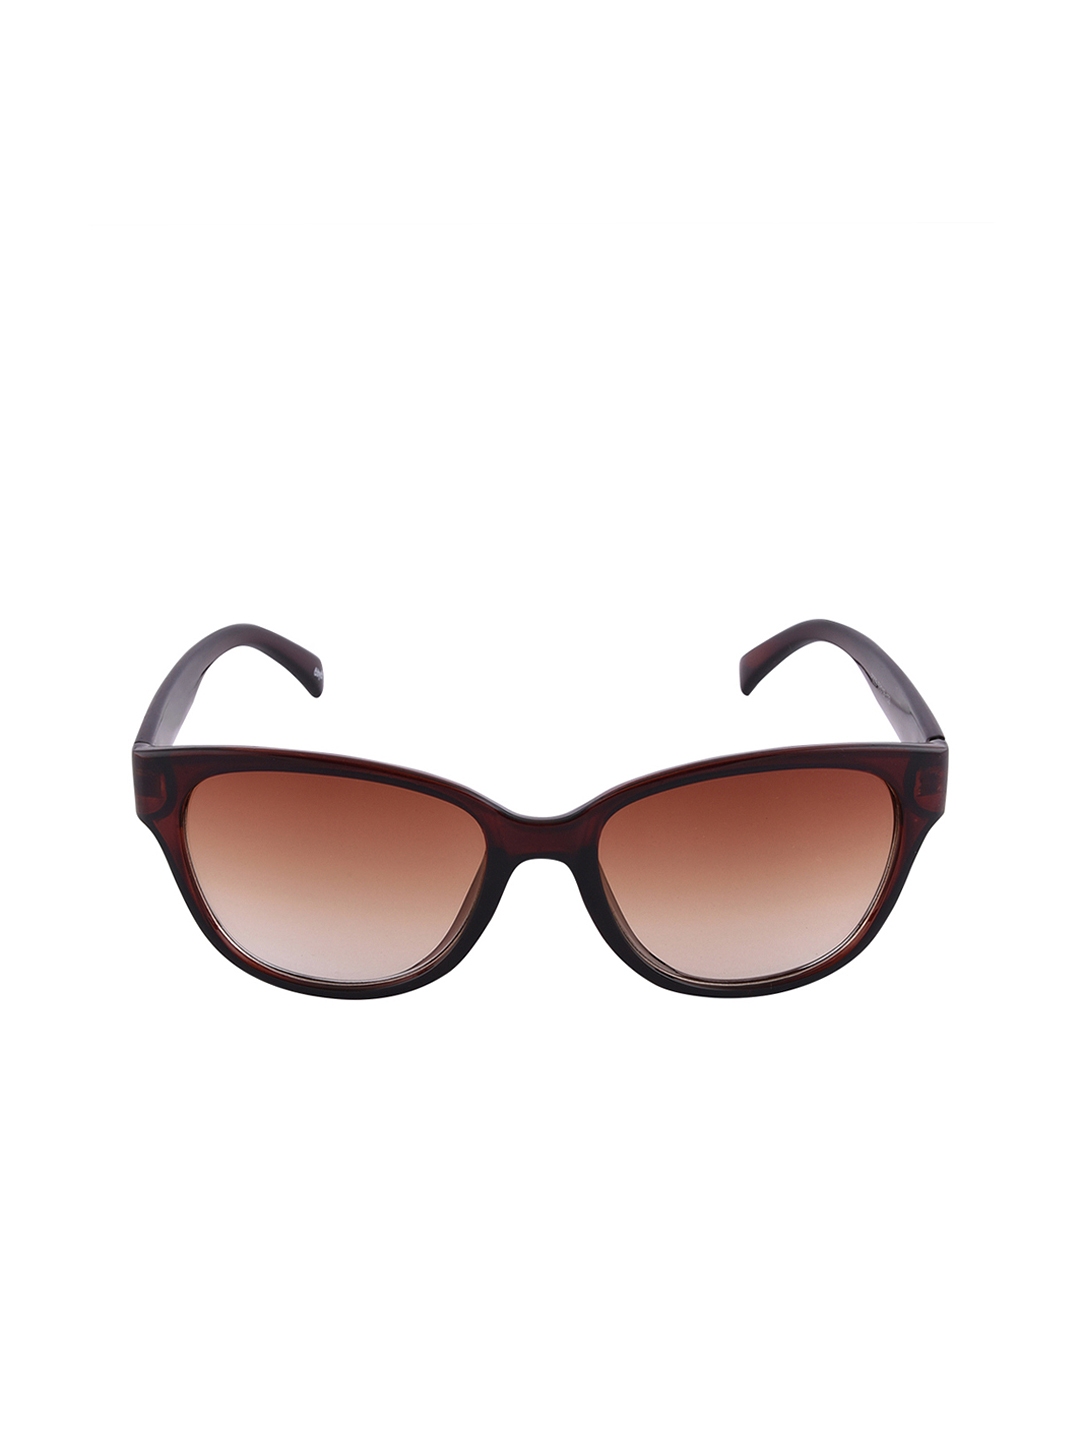  6by6 Unisex Rectangle Sunglasses 